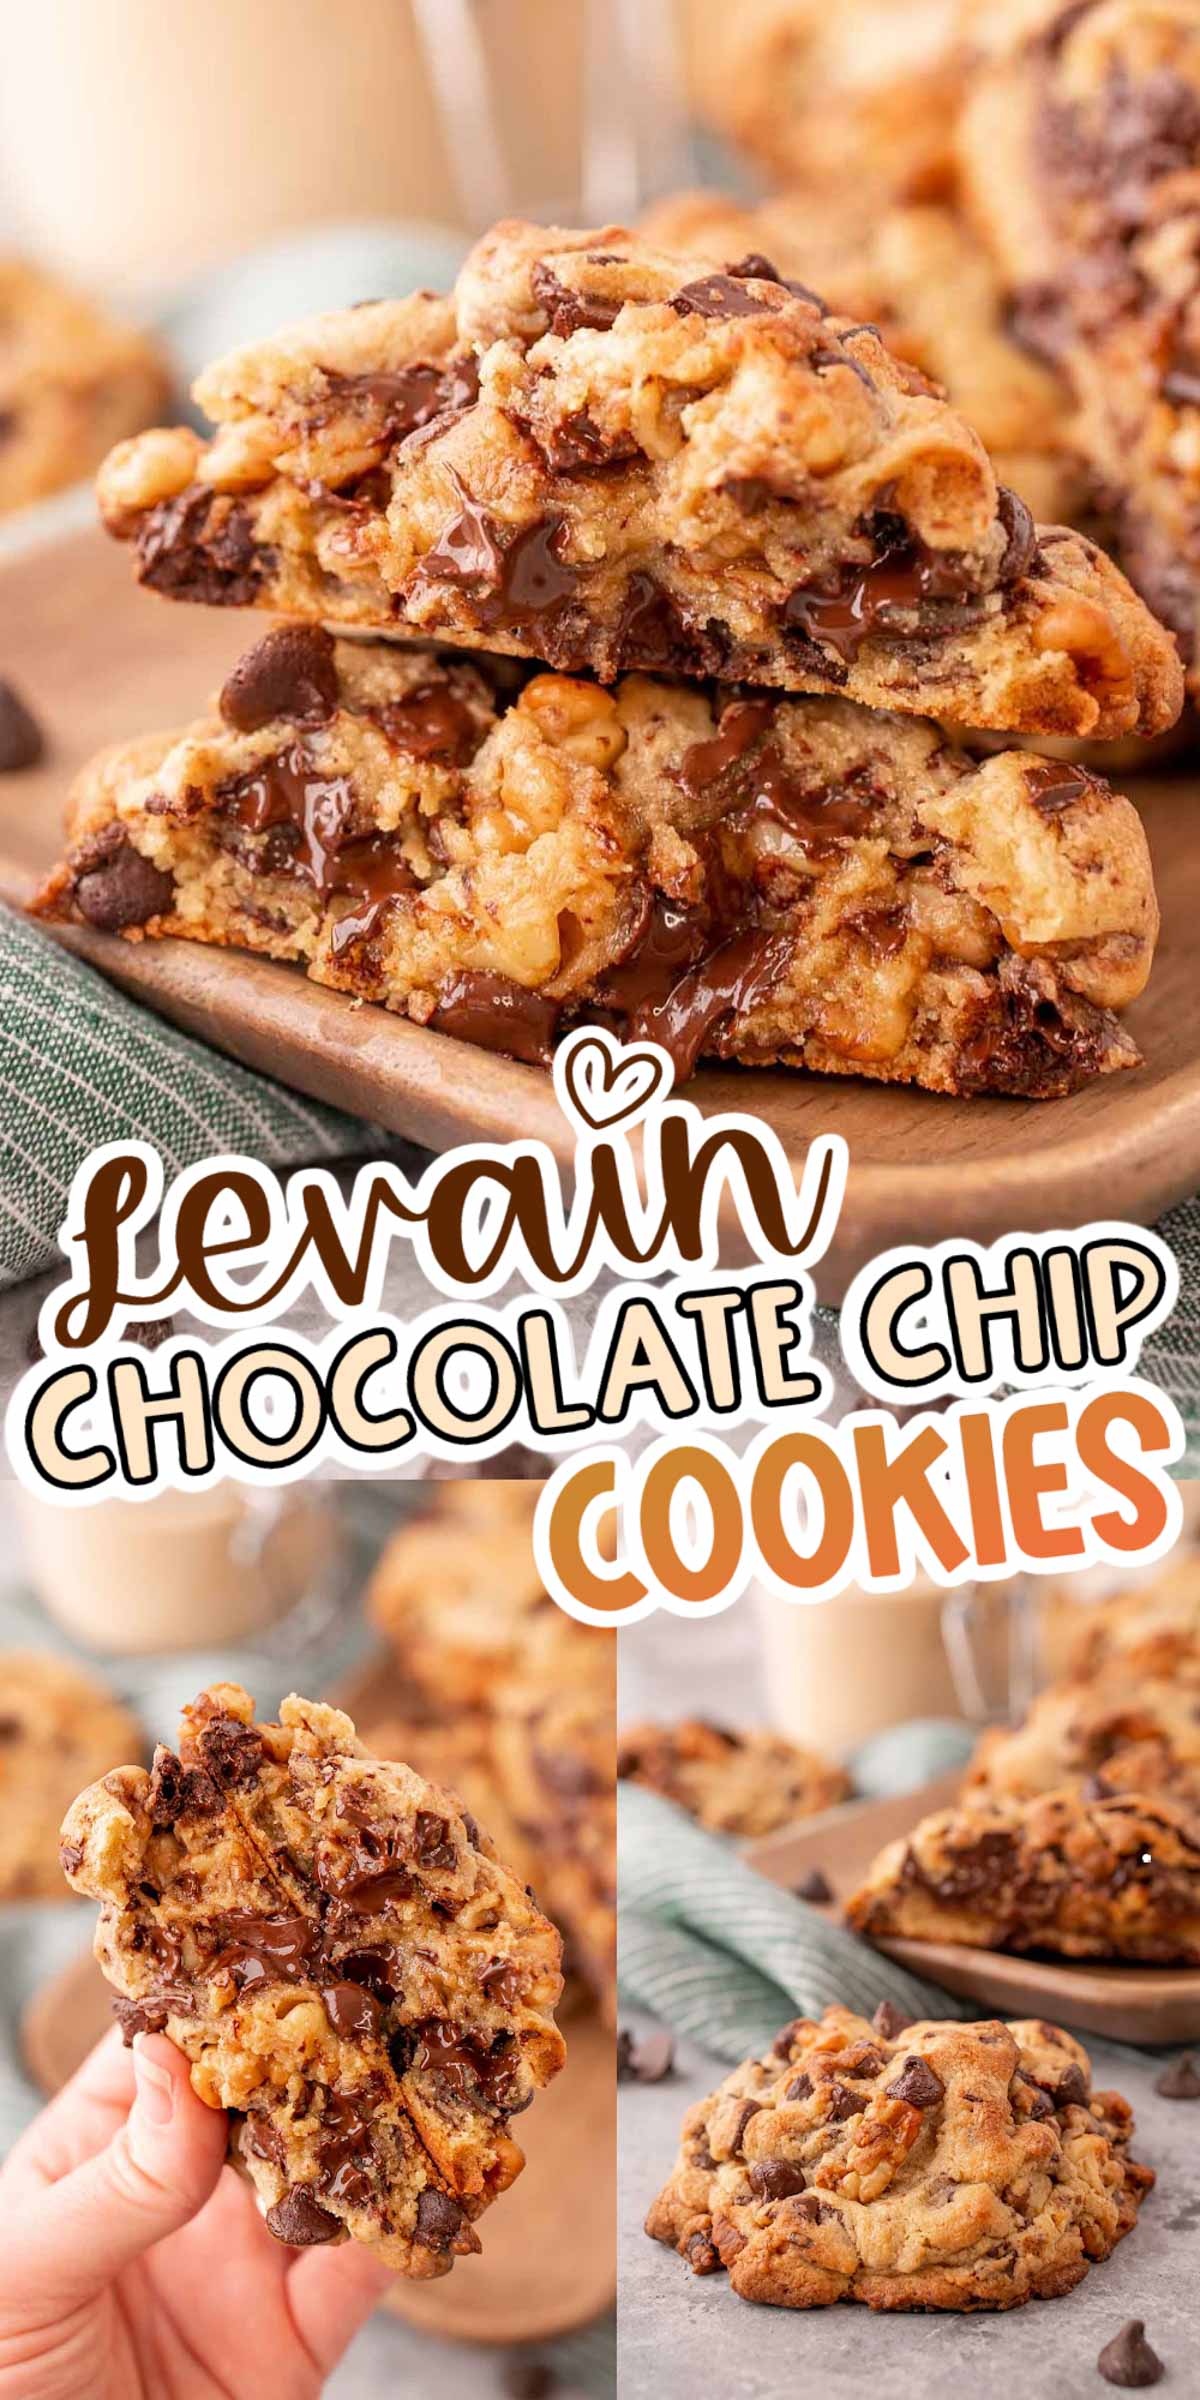 Levain Chocolate Chip Cookies are world-famous, and this copycat recipe allows you to make them right at home for a fraction of the price! Loaded with chocolate and walnuts, these cookies aren't overly sweet and weigh 6 ounces each! via @sugarandsoulco